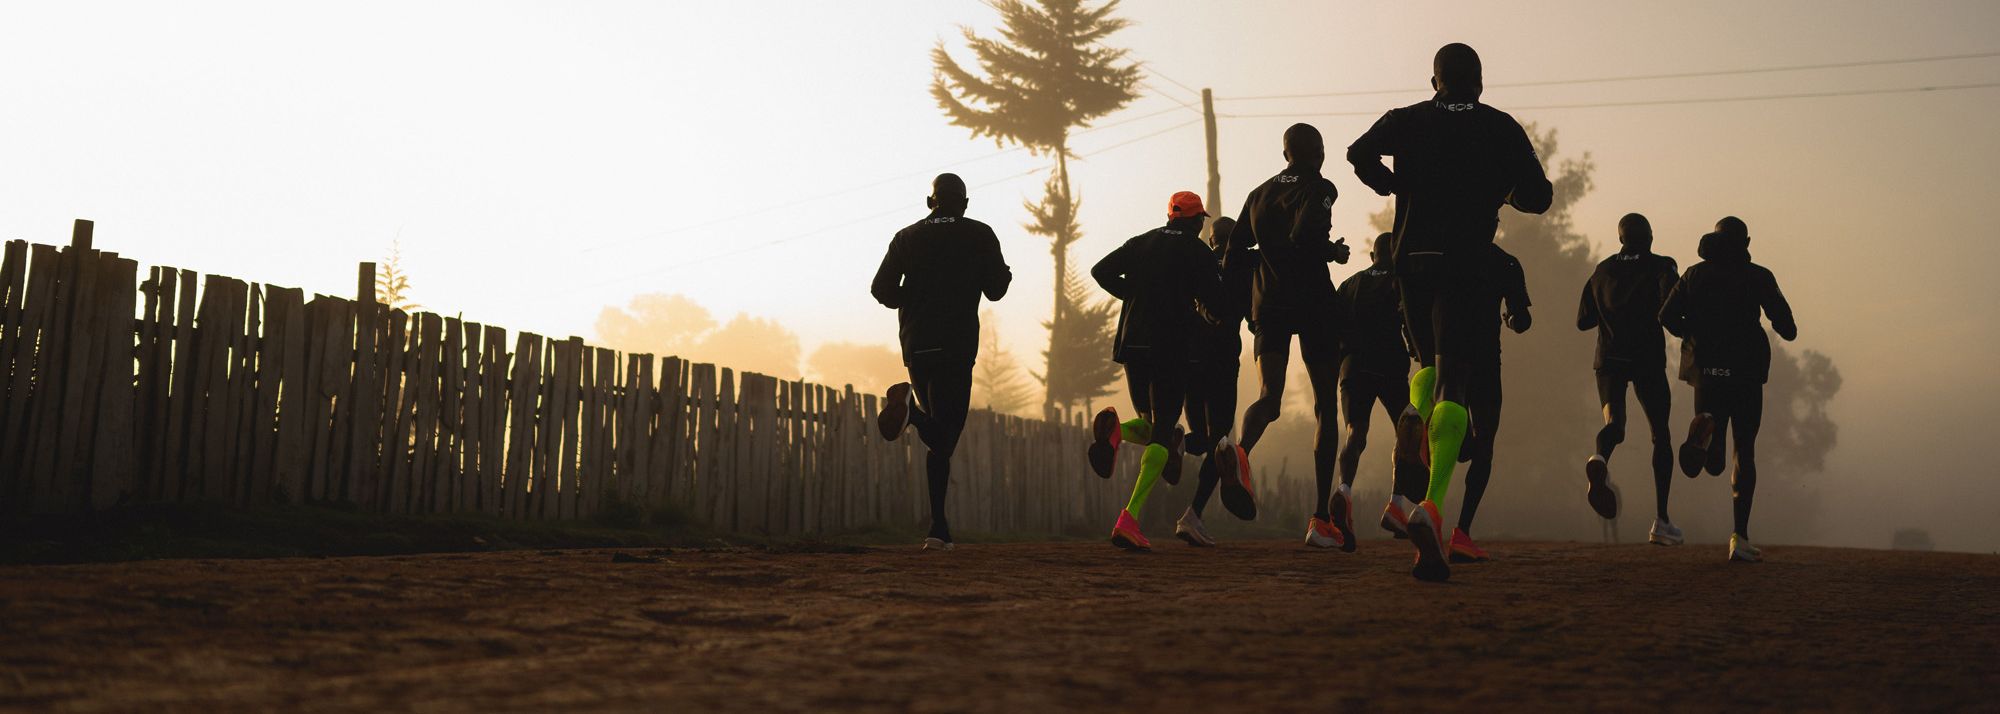 The long run, for elite and amateurs alike, forms an integral part of distance runners’ training.